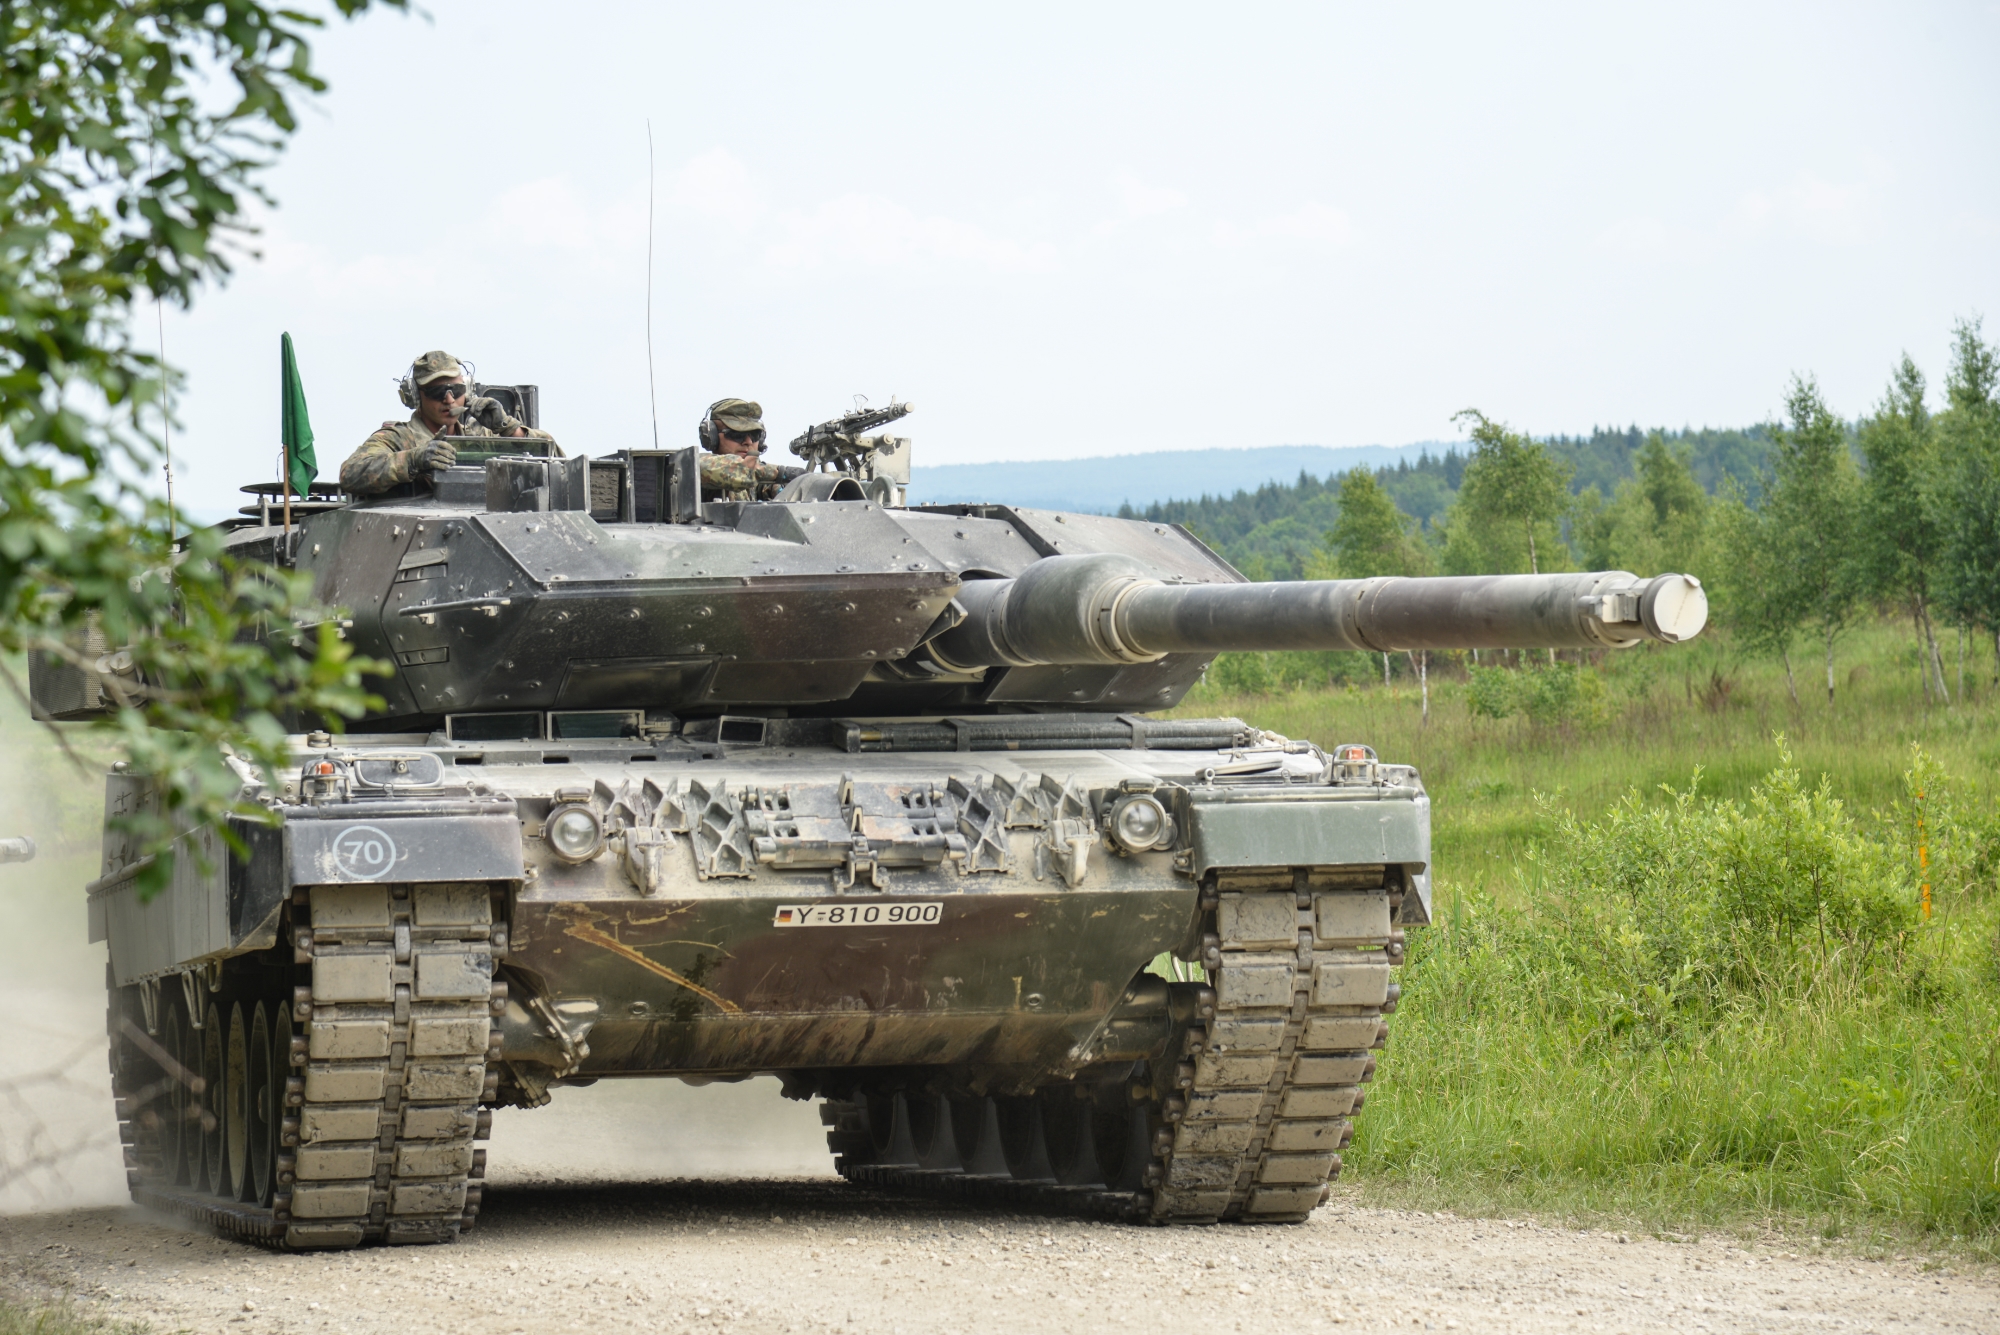 Now it's official: Germany has approved the supply of Leopard 2 tanks to Ukraine and allowed the re-export of tanks to its partners